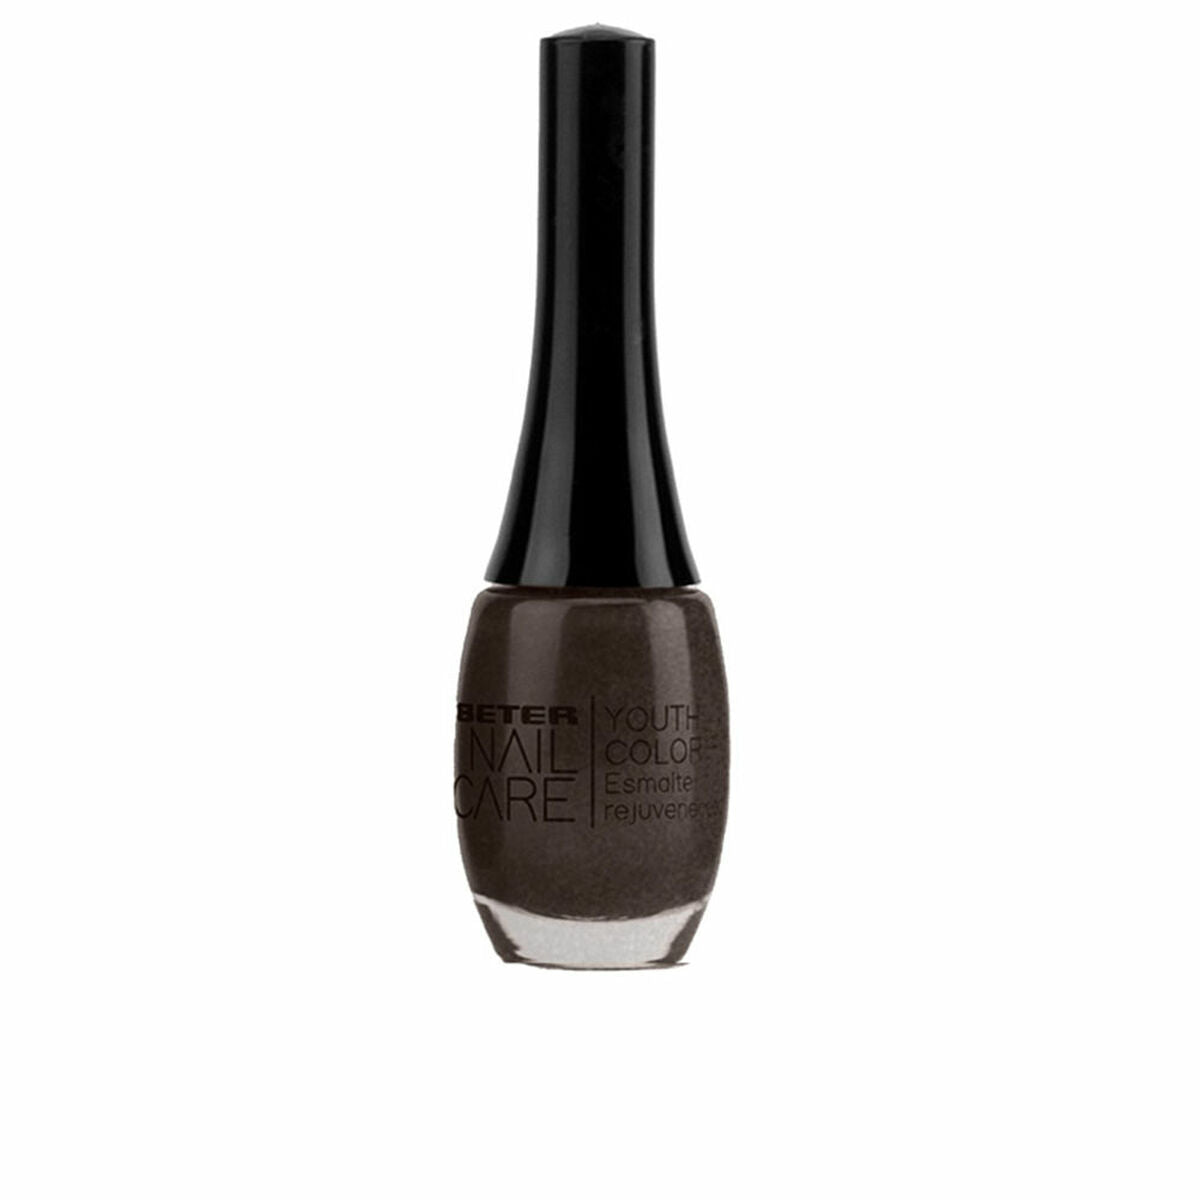 Nail polish Beter Nail Care Youth Color Nº 233 Metal Heads 11 ml - Calm Beauty IE